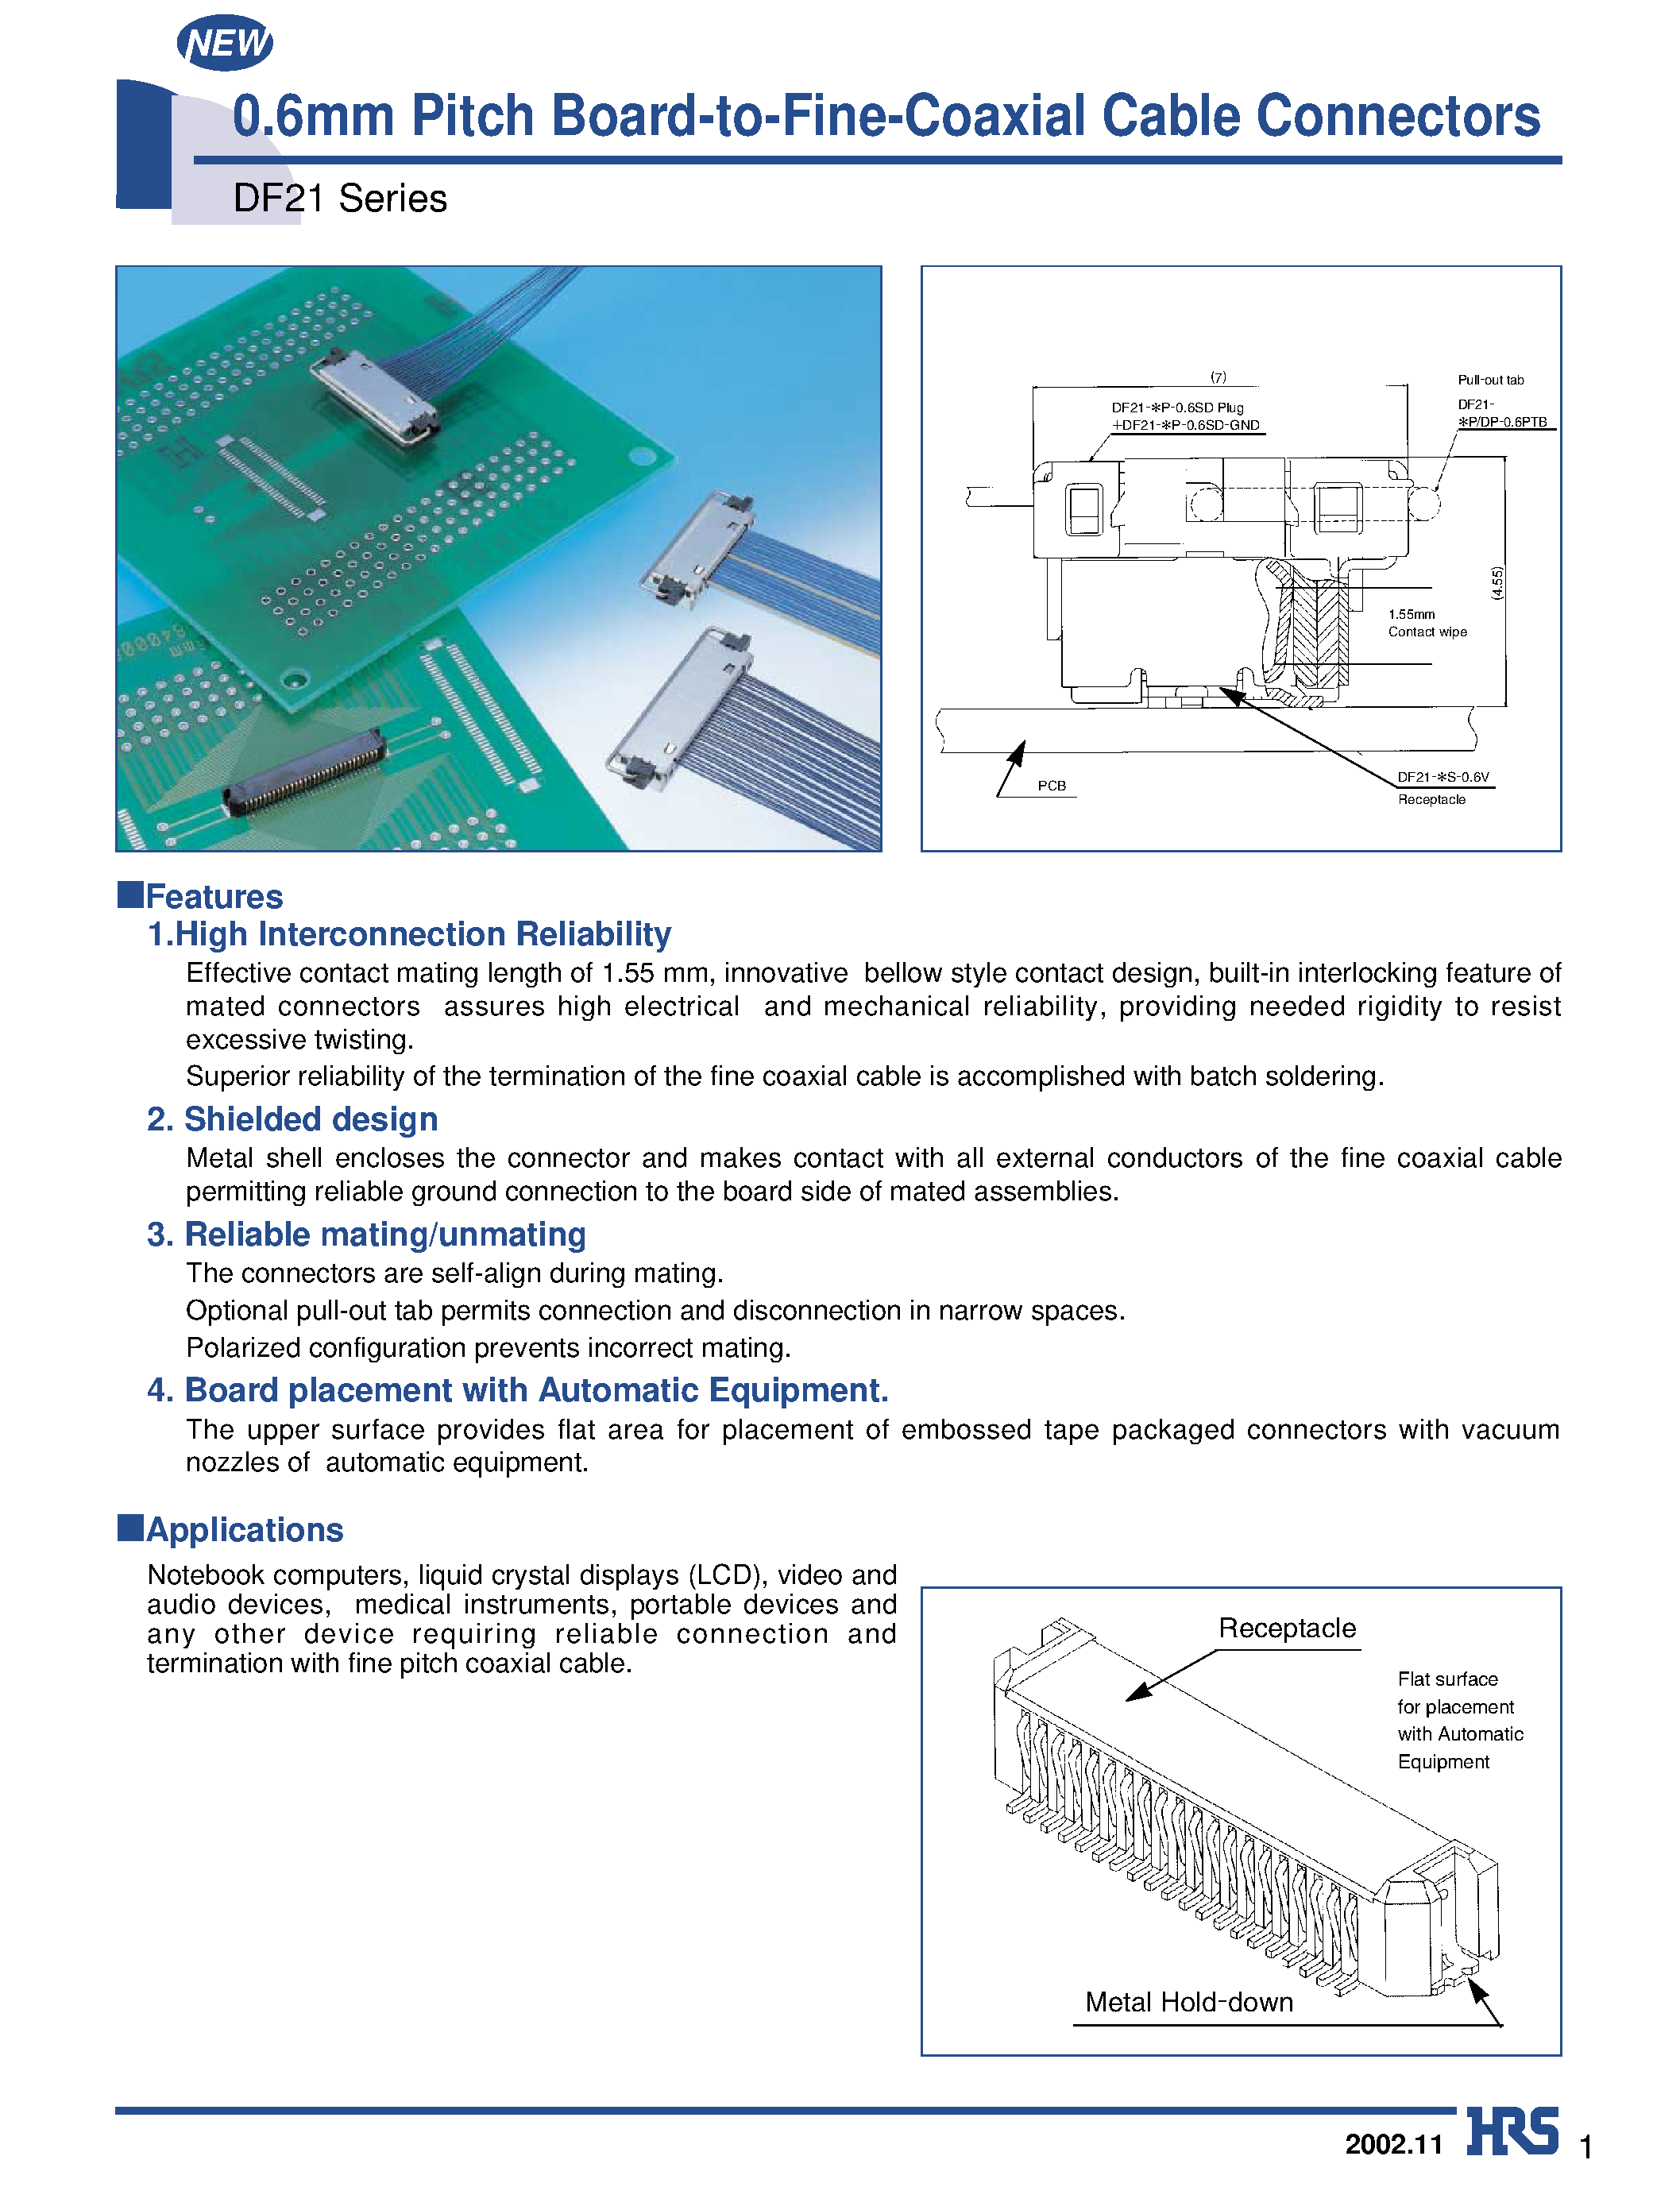 Datasheet DF21-20S-0.6V - 0.6mm Pitch Board-to-Fine-Coaxial Cable Connectors page 1